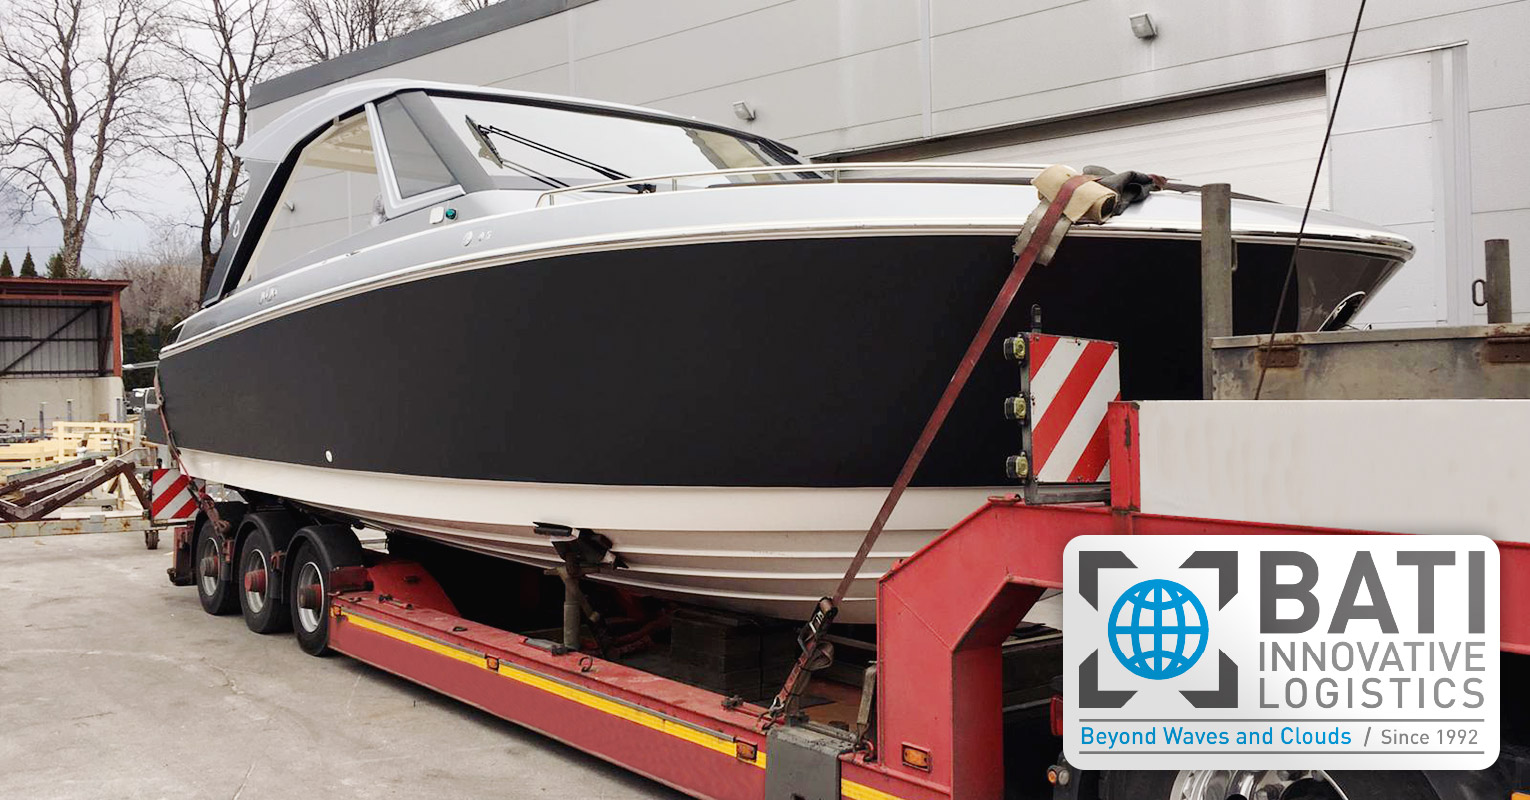 Bati Group Delivers Another Boat to Her Owner